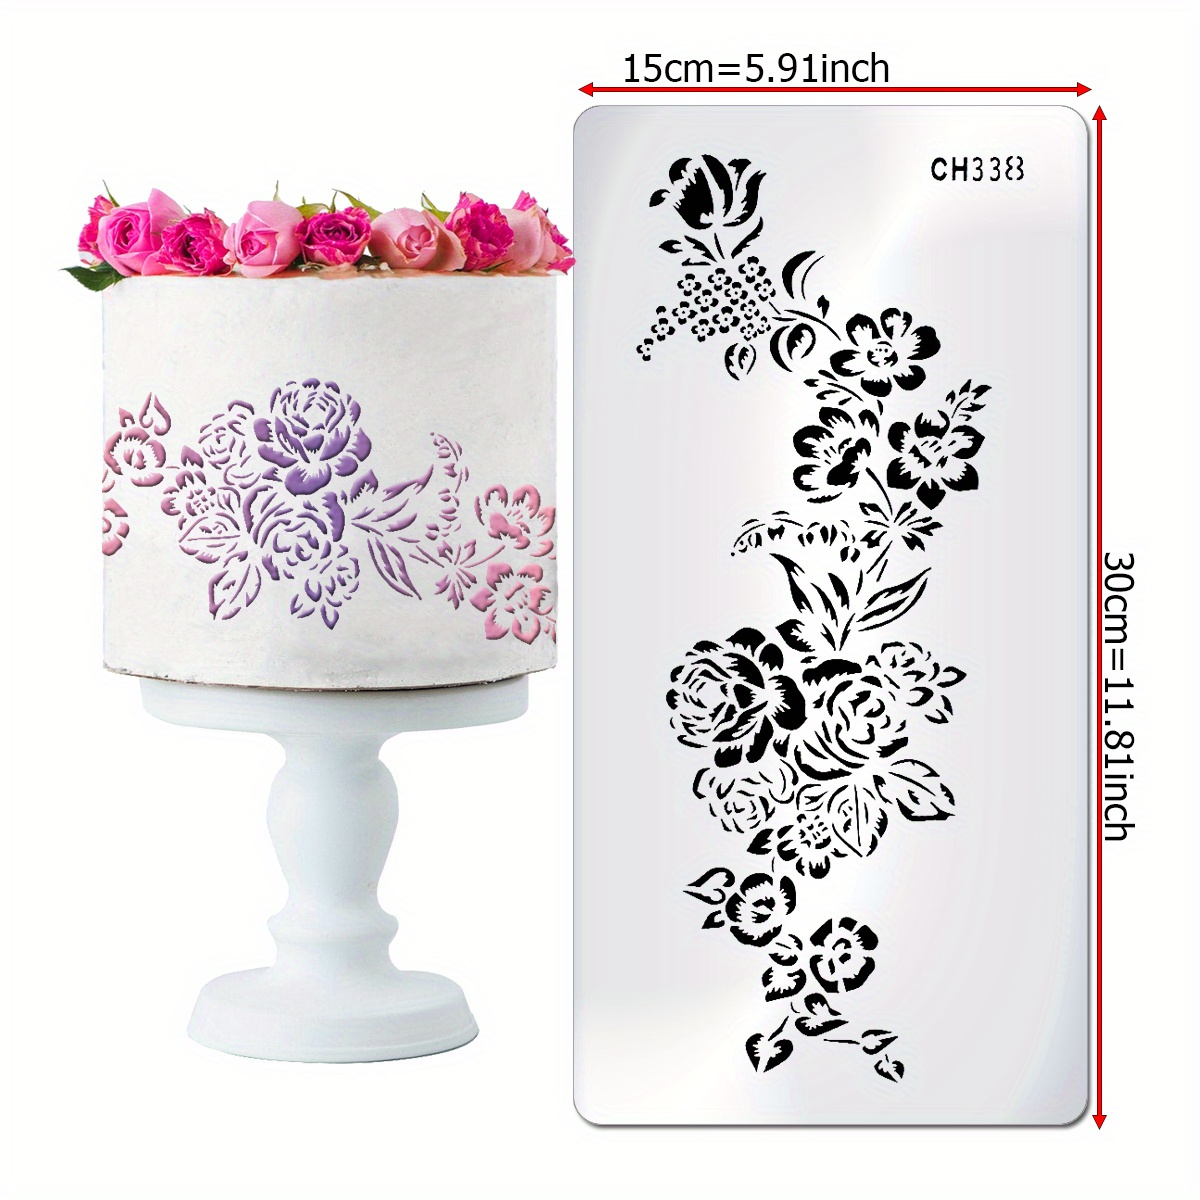 Cake Decorating Stencils Floral Cake Stencils Template Reusable, Spray  Flower Butterfly Geometric Aesthetics Lace Fondant Molds Lace Molds, Mesh